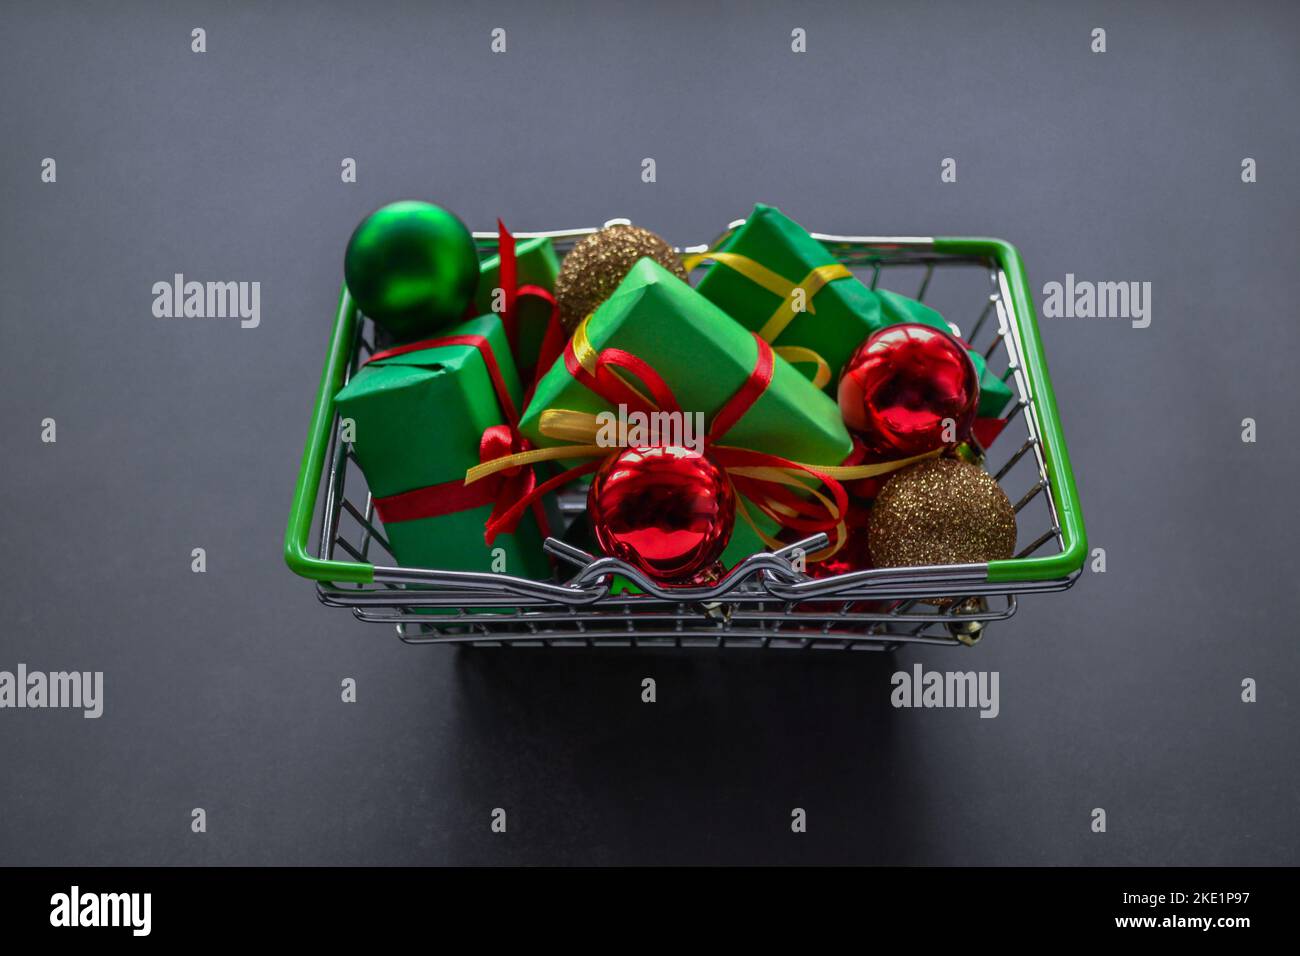 Metal shopping basket with gifts in green paper with red and yellow bows, Christmas balls of red, green and gold on a dark background. Black Friday sa Stock Photo